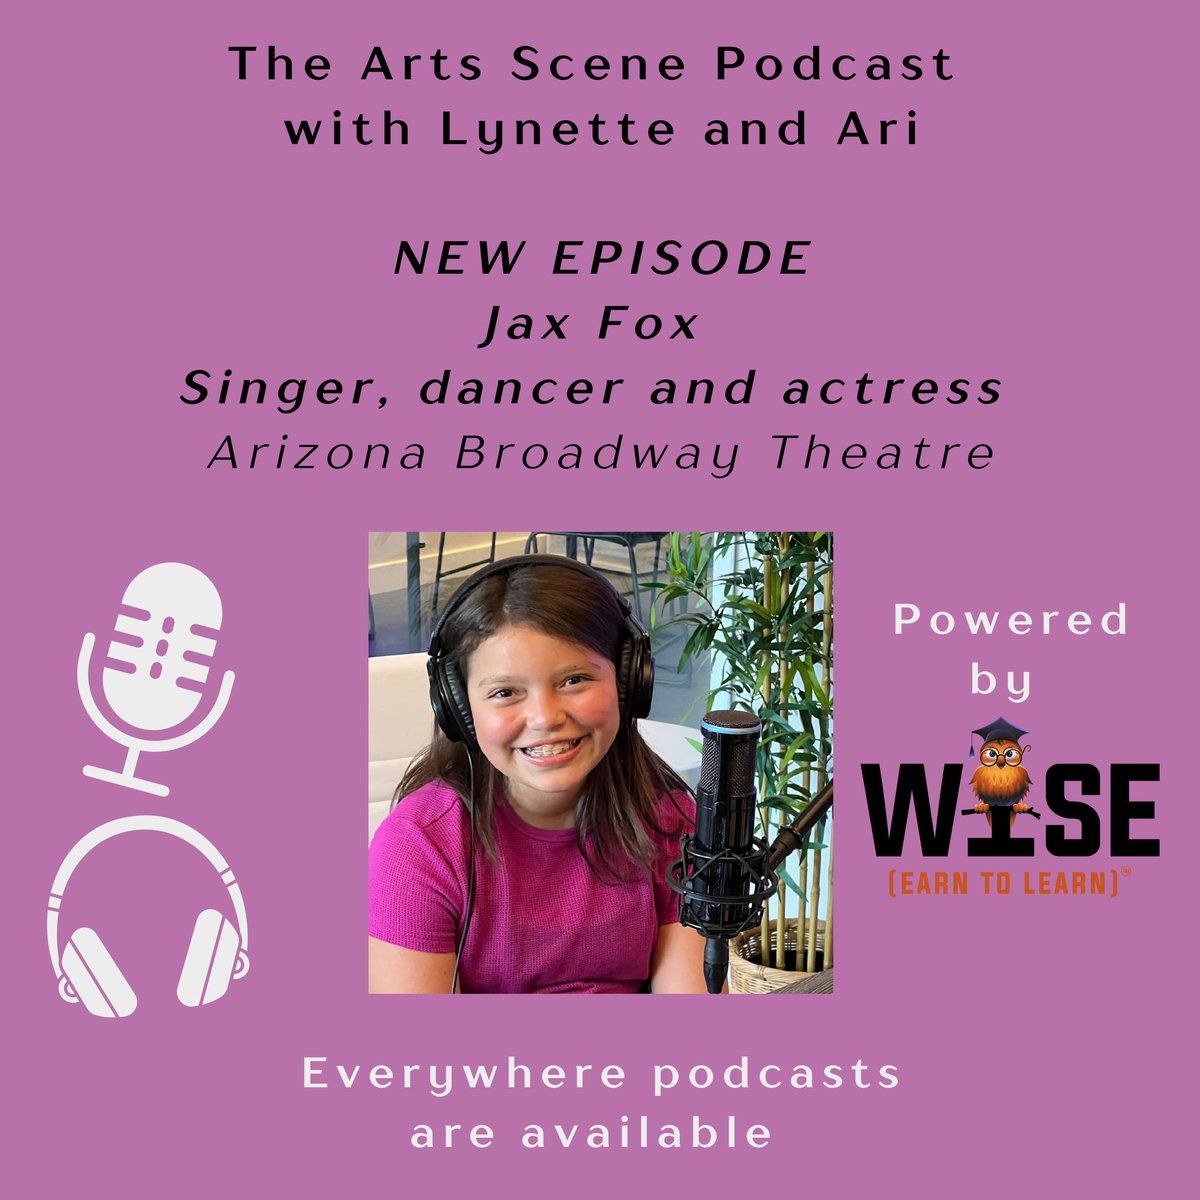 This week’s guest is Jax Fox. Don’t forget her name — She’ll land among the stars! Meet Jax Fox in the latest episode of The Arts Scene Podcast with @LLCarrington and Ari at open.spotify.com/episode/7i6Zbr… #theartsscenepodcast #performingarts